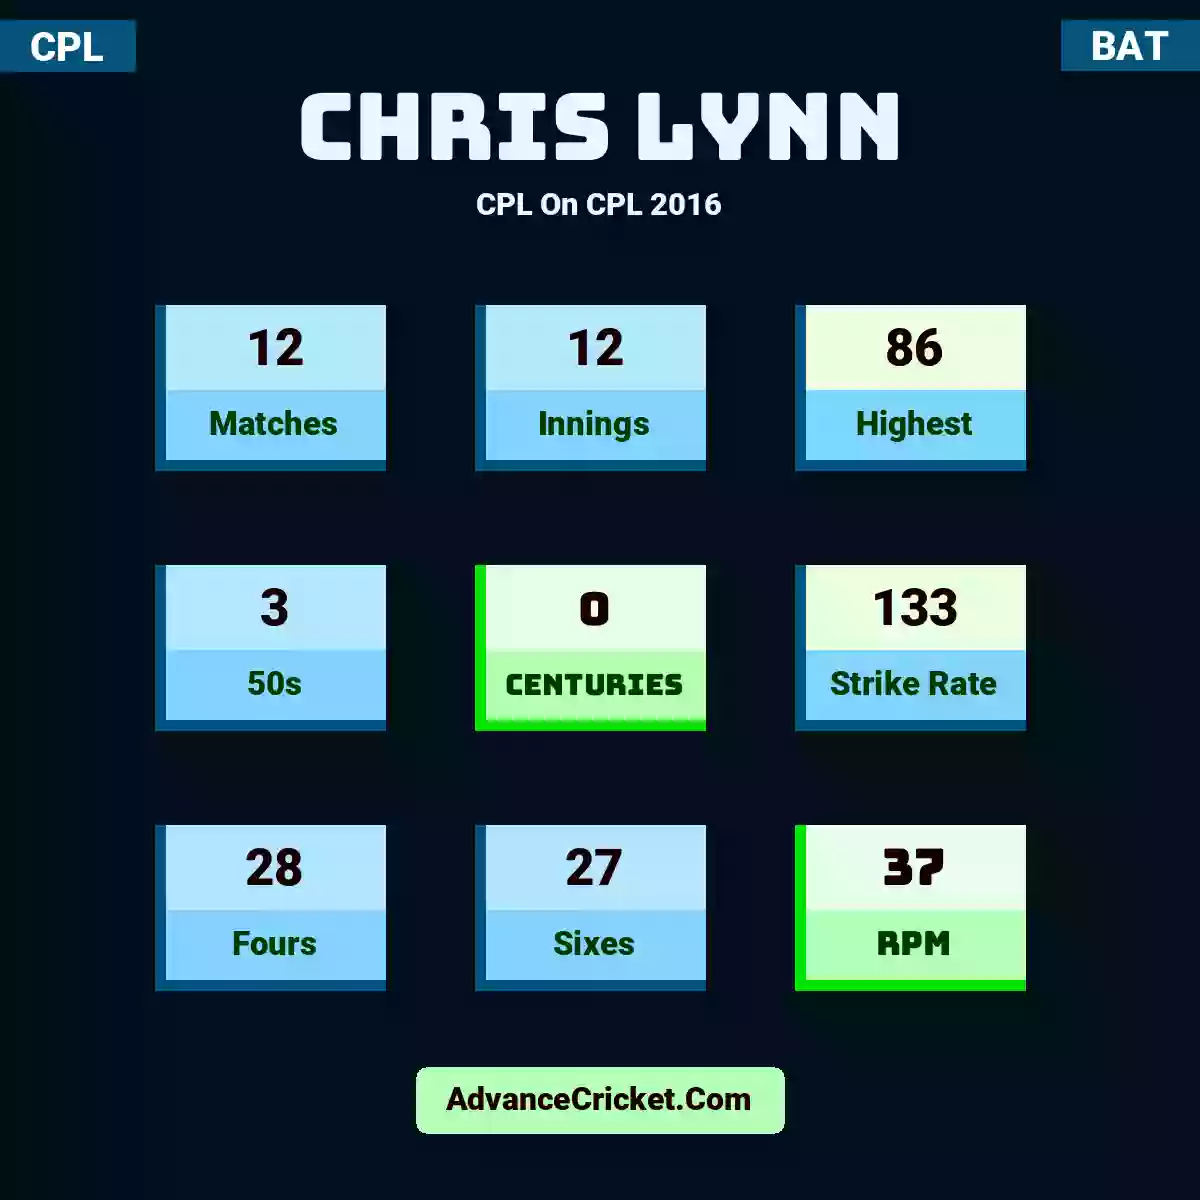 Chris Lynn CPL  On CPL 2016, Chris Lynn played 12 matches, scored 86 runs as highest, 3 half-centuries, and 0 centuries, with a strike rate of 133. C.Lynn hit 28 fours and 27 sixes, with an RPM of 37.